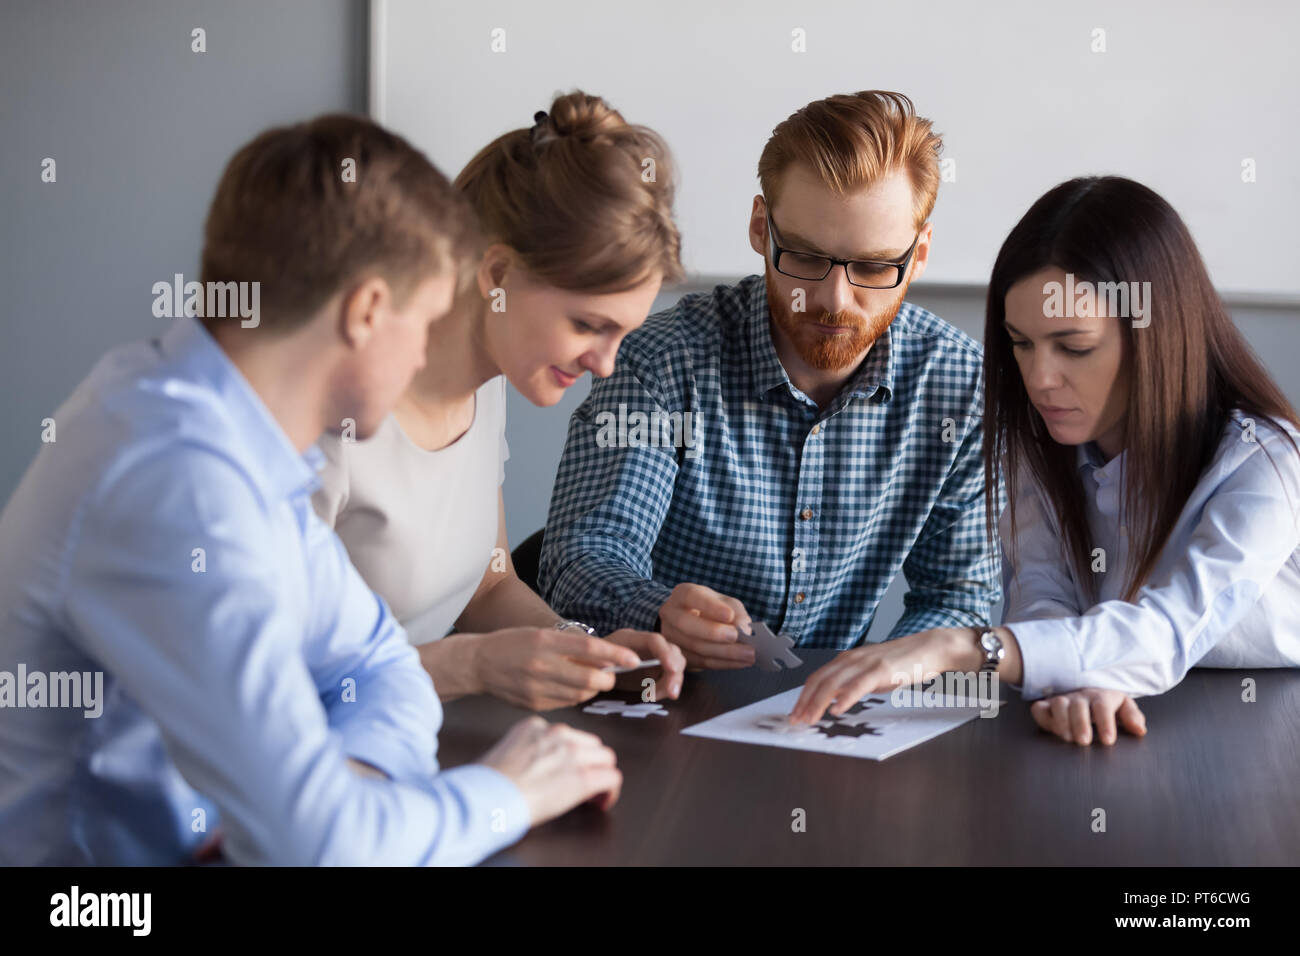 Focused team people assembling puzzle finding business solutions Stock Photo